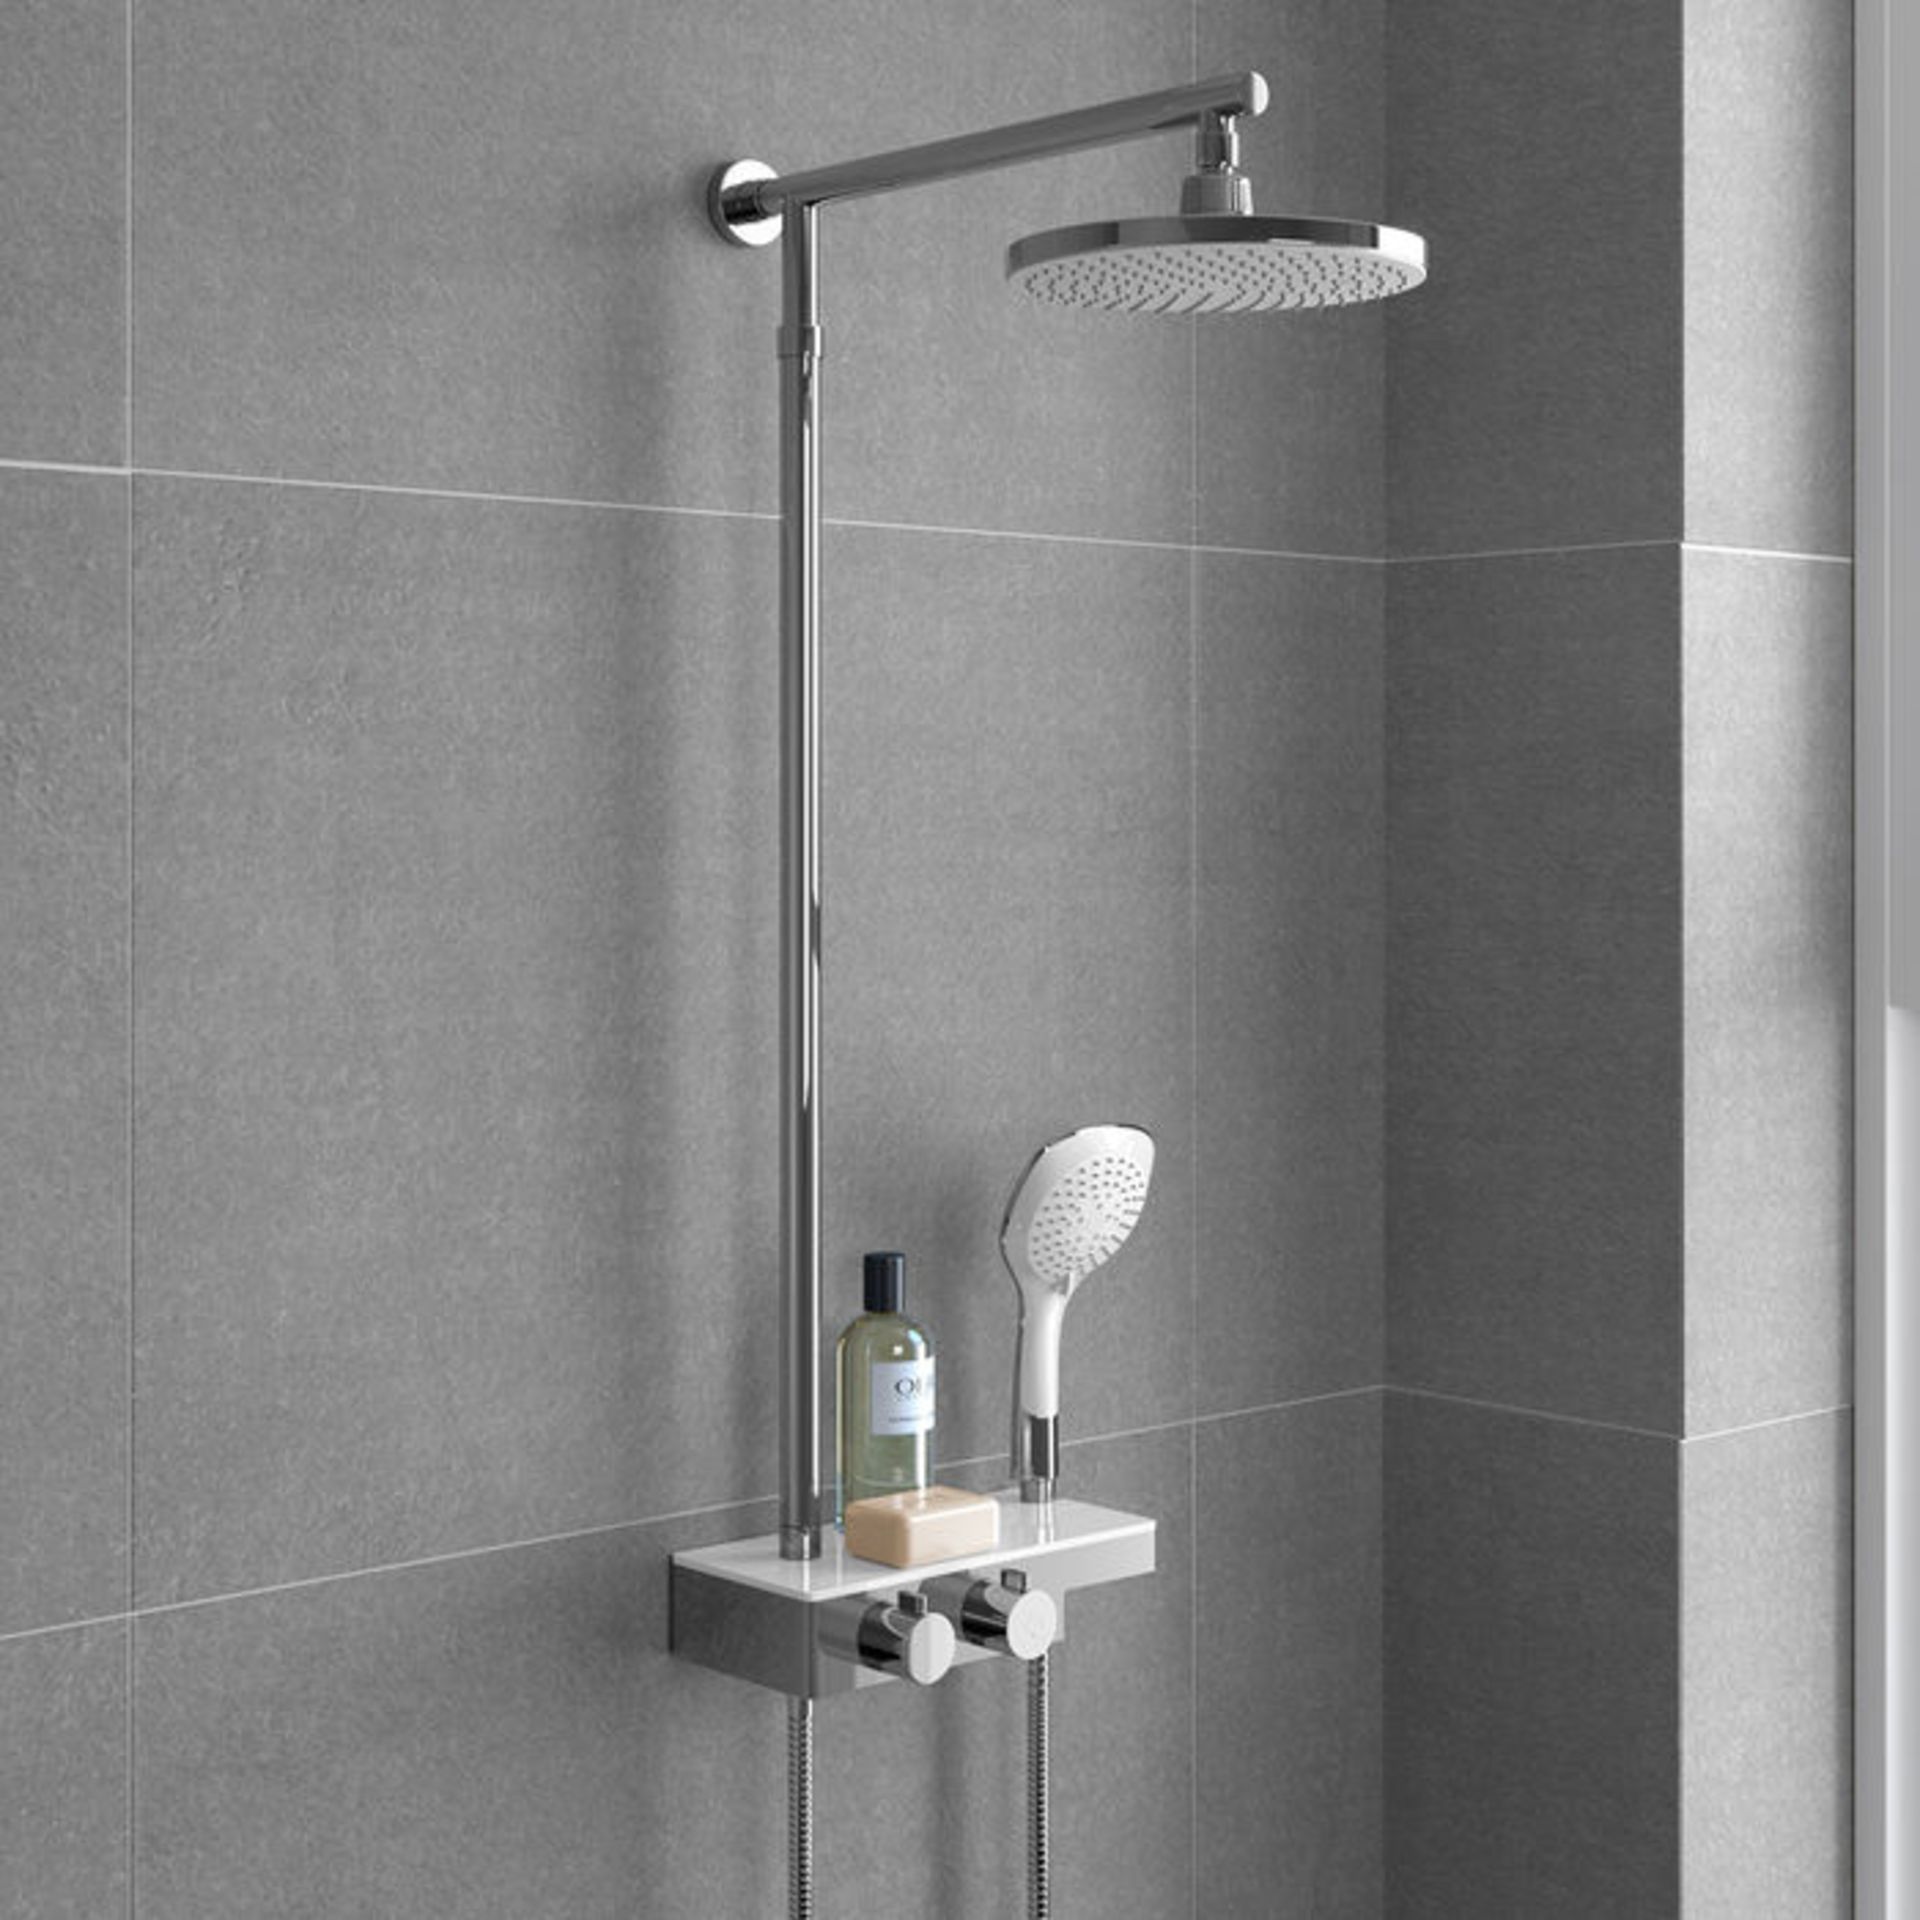 (OS37) Round Exposed Thermostatic Mixer Shower Kit Medium Head & Shelf. RRP £349.99. Cool to touch - Image 2 of 5